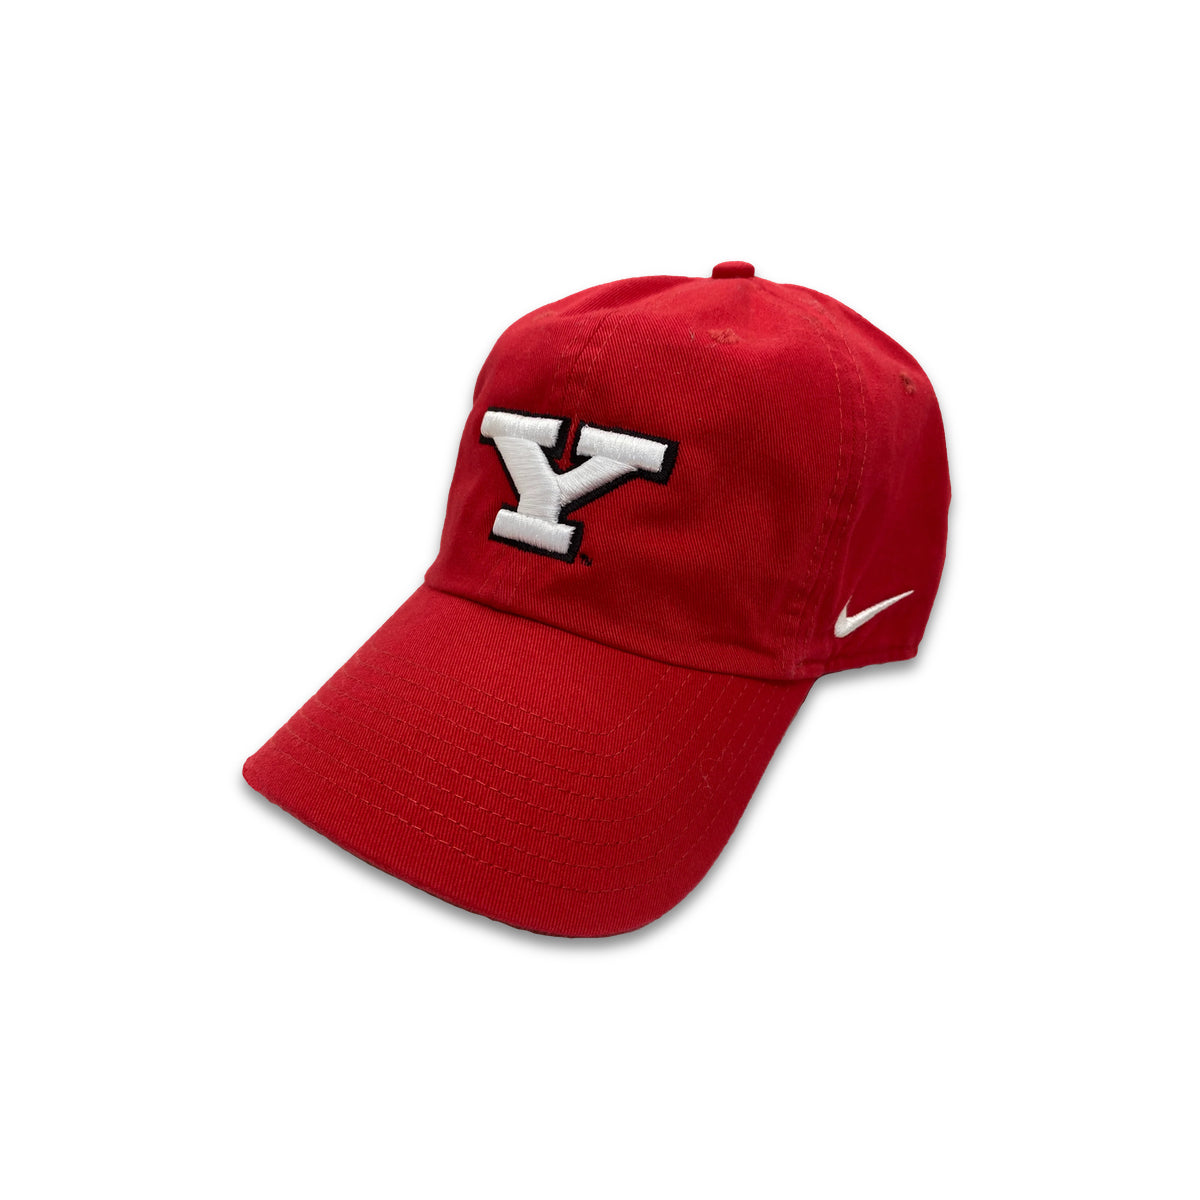 Youngstown State Block Y Nike Hat (Red)